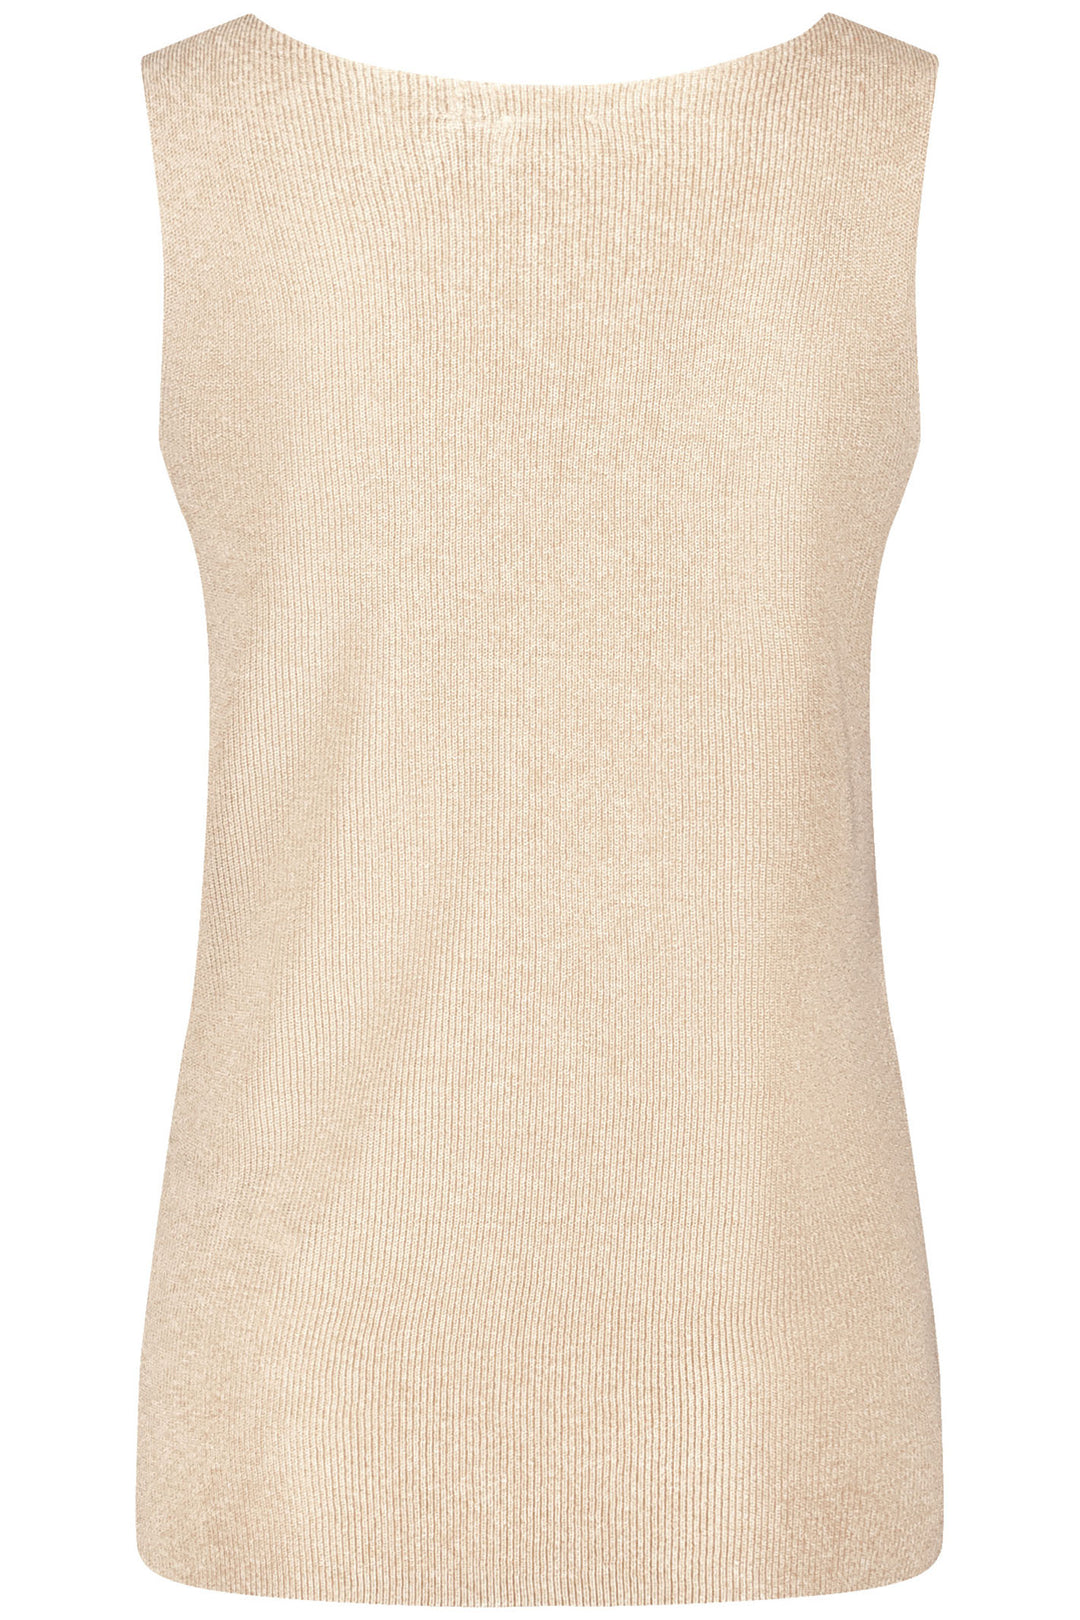 Gerry Weber 371031 Oatmeal Knitted Vest Top - Experience Boutique